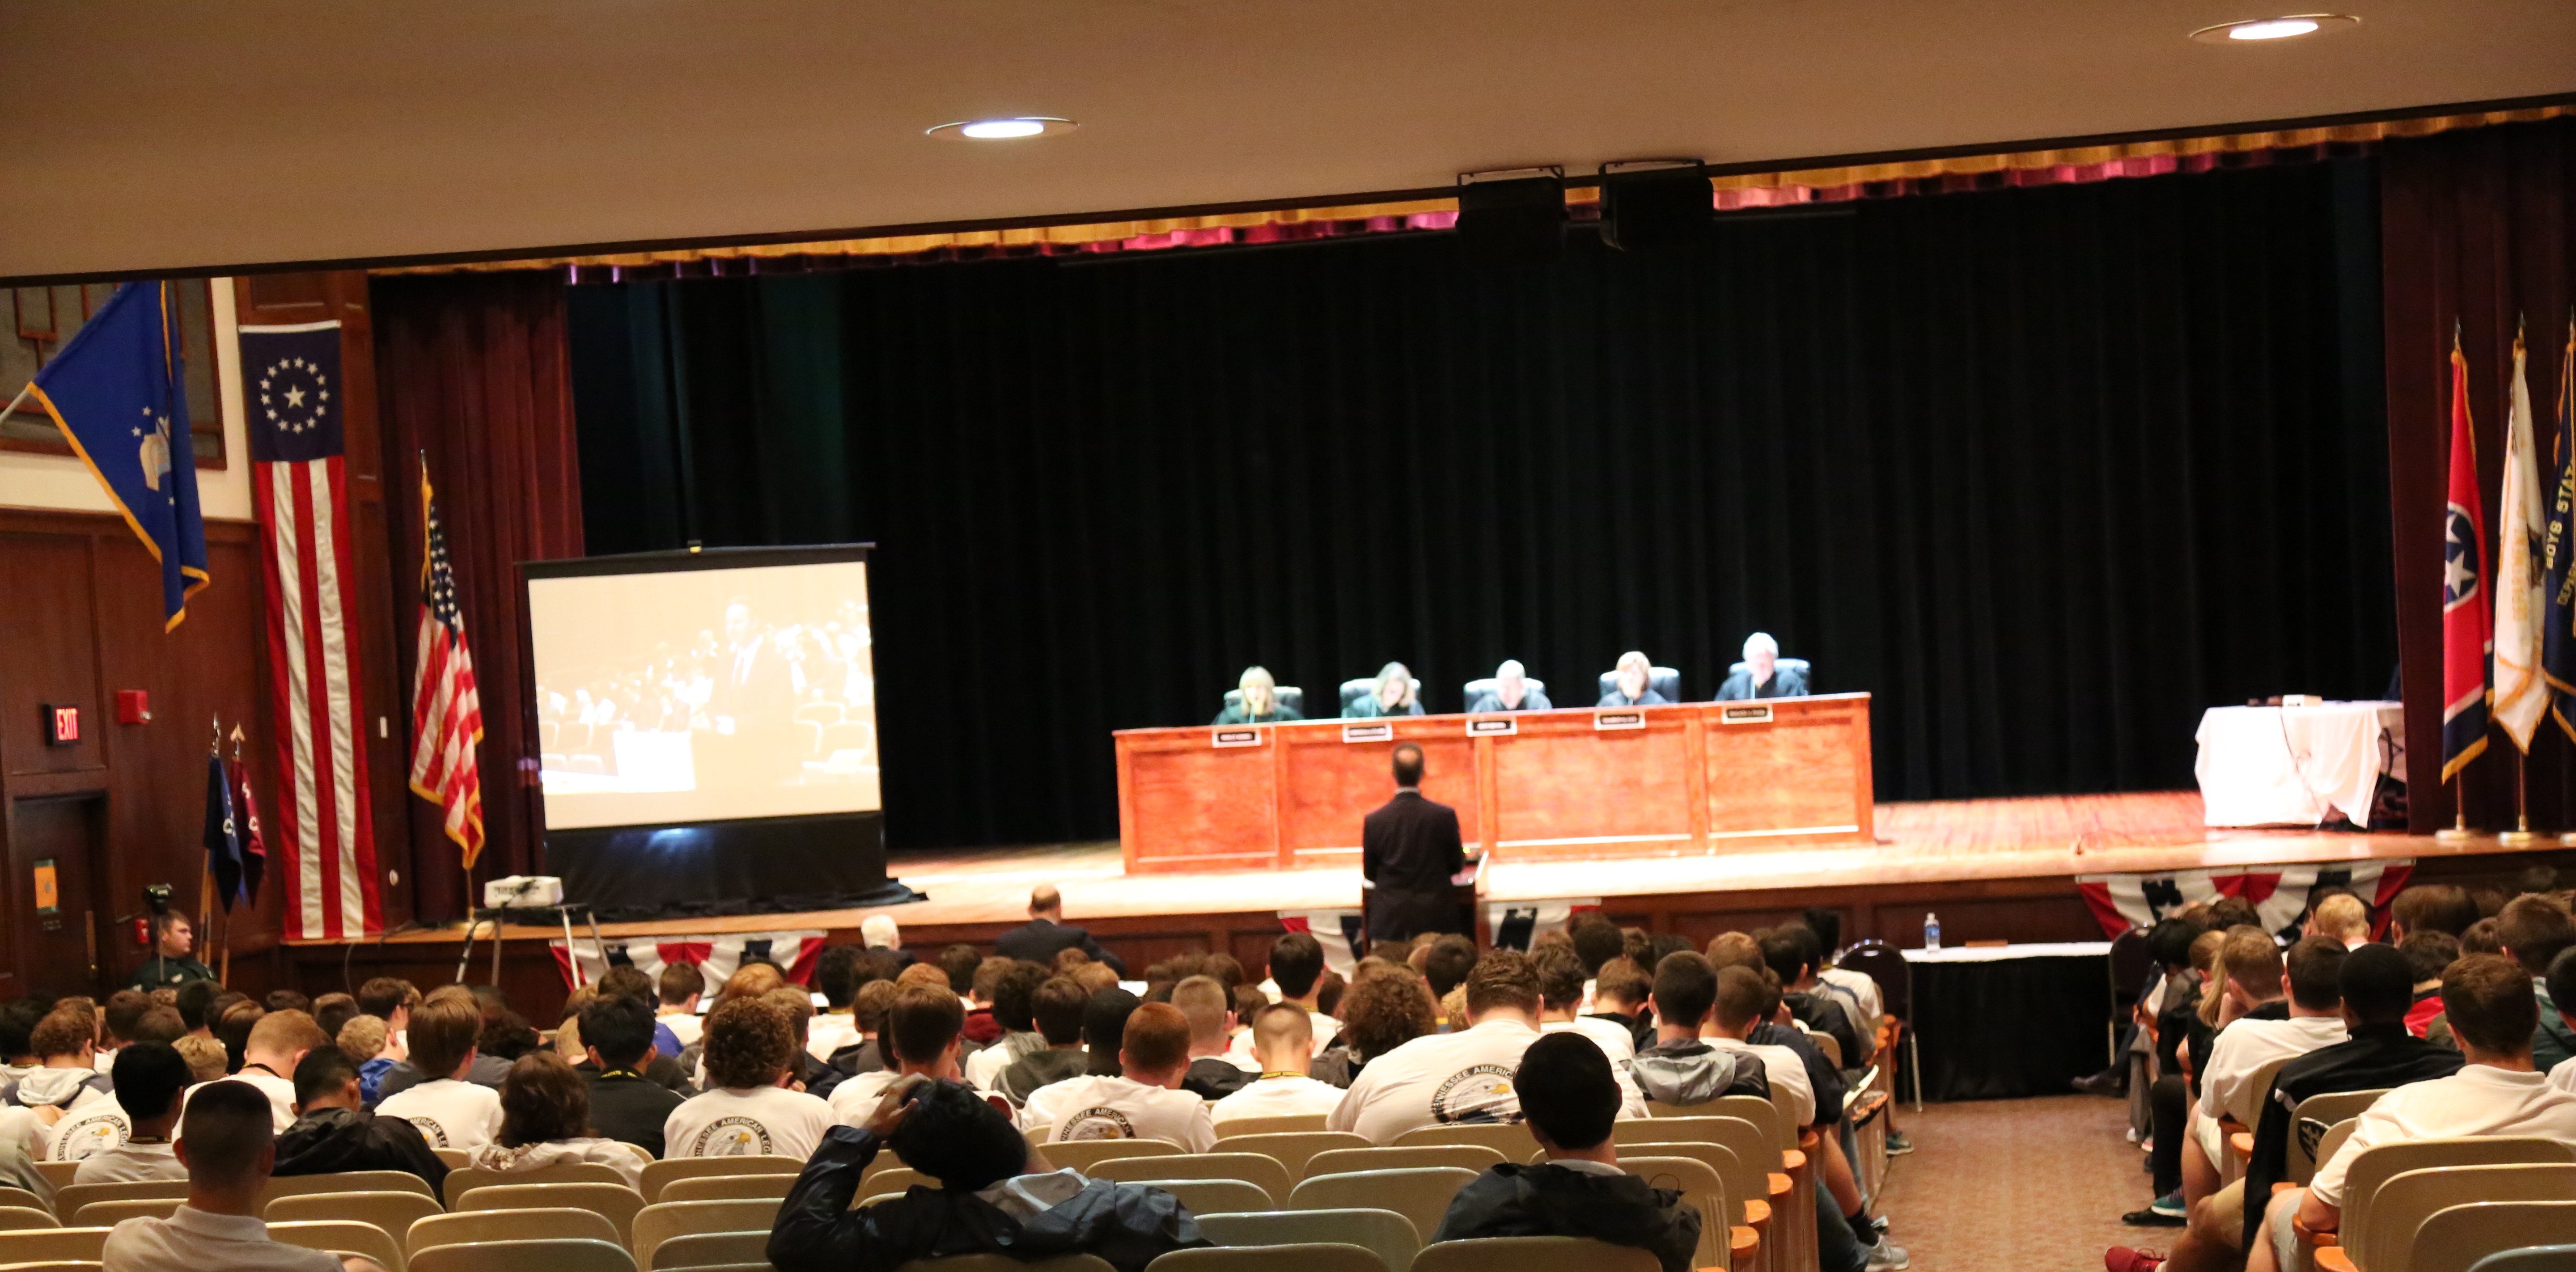 The Tennessee Supreme Court hears oral arguments at Tennessee Tech University in Cookeville before Boys State high school students.